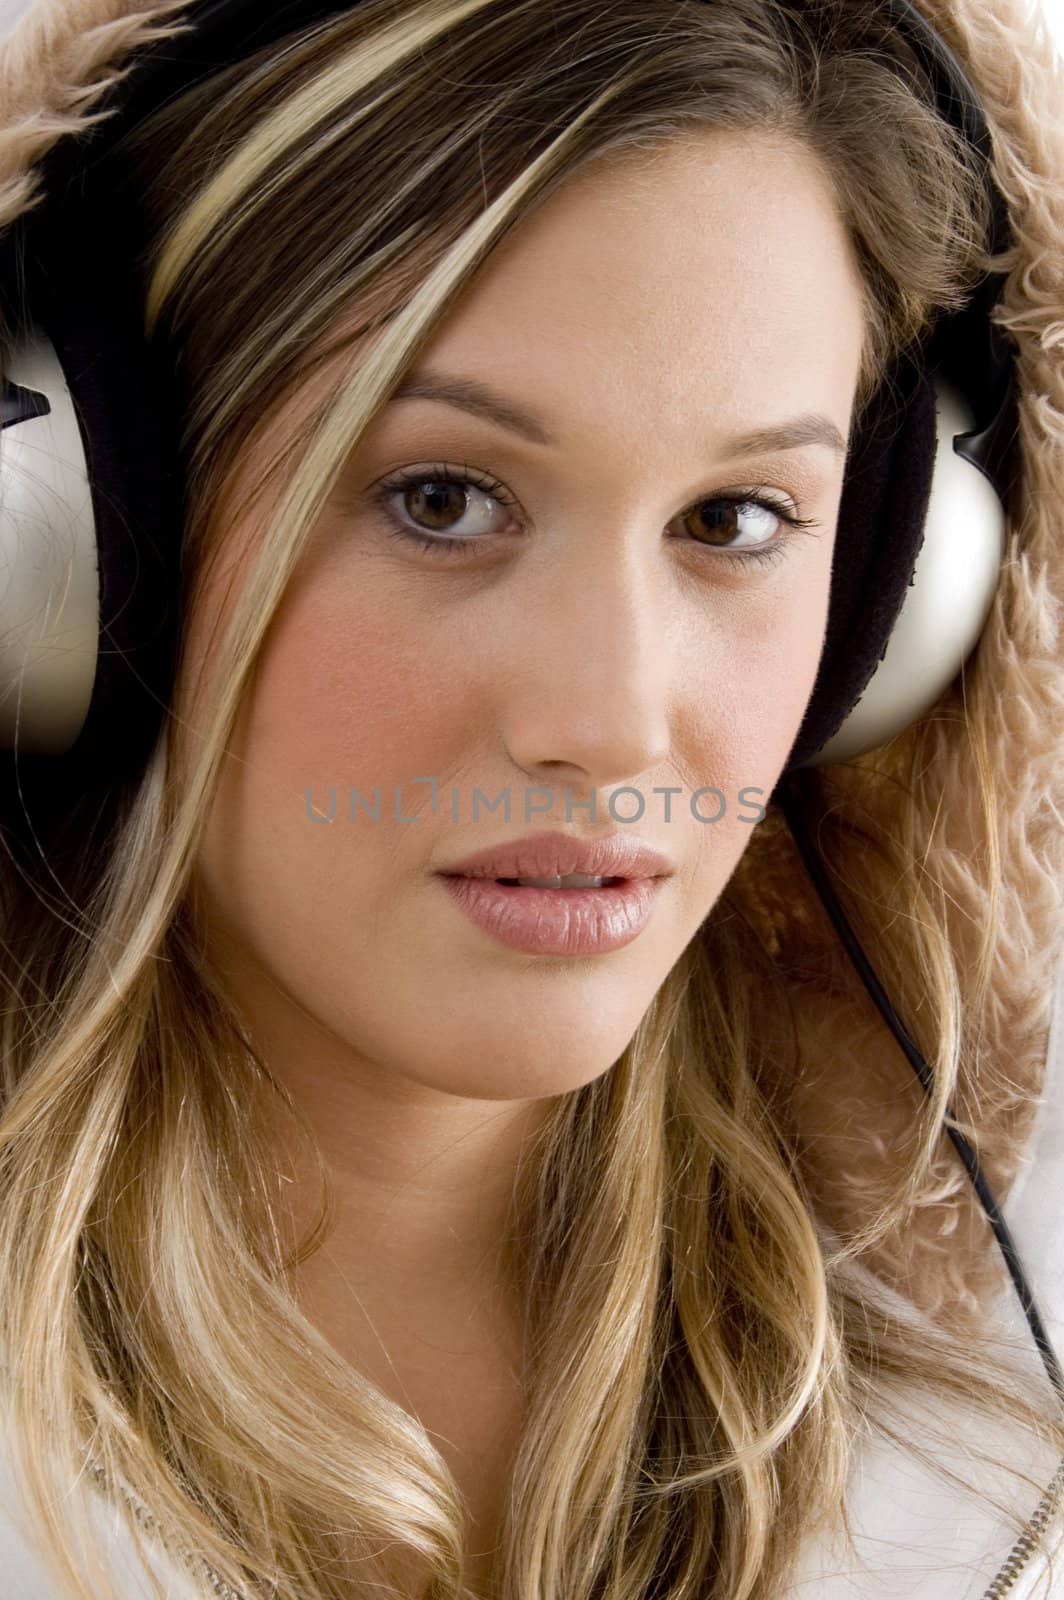 young woman enjoying music with headphones by imagerymajestic